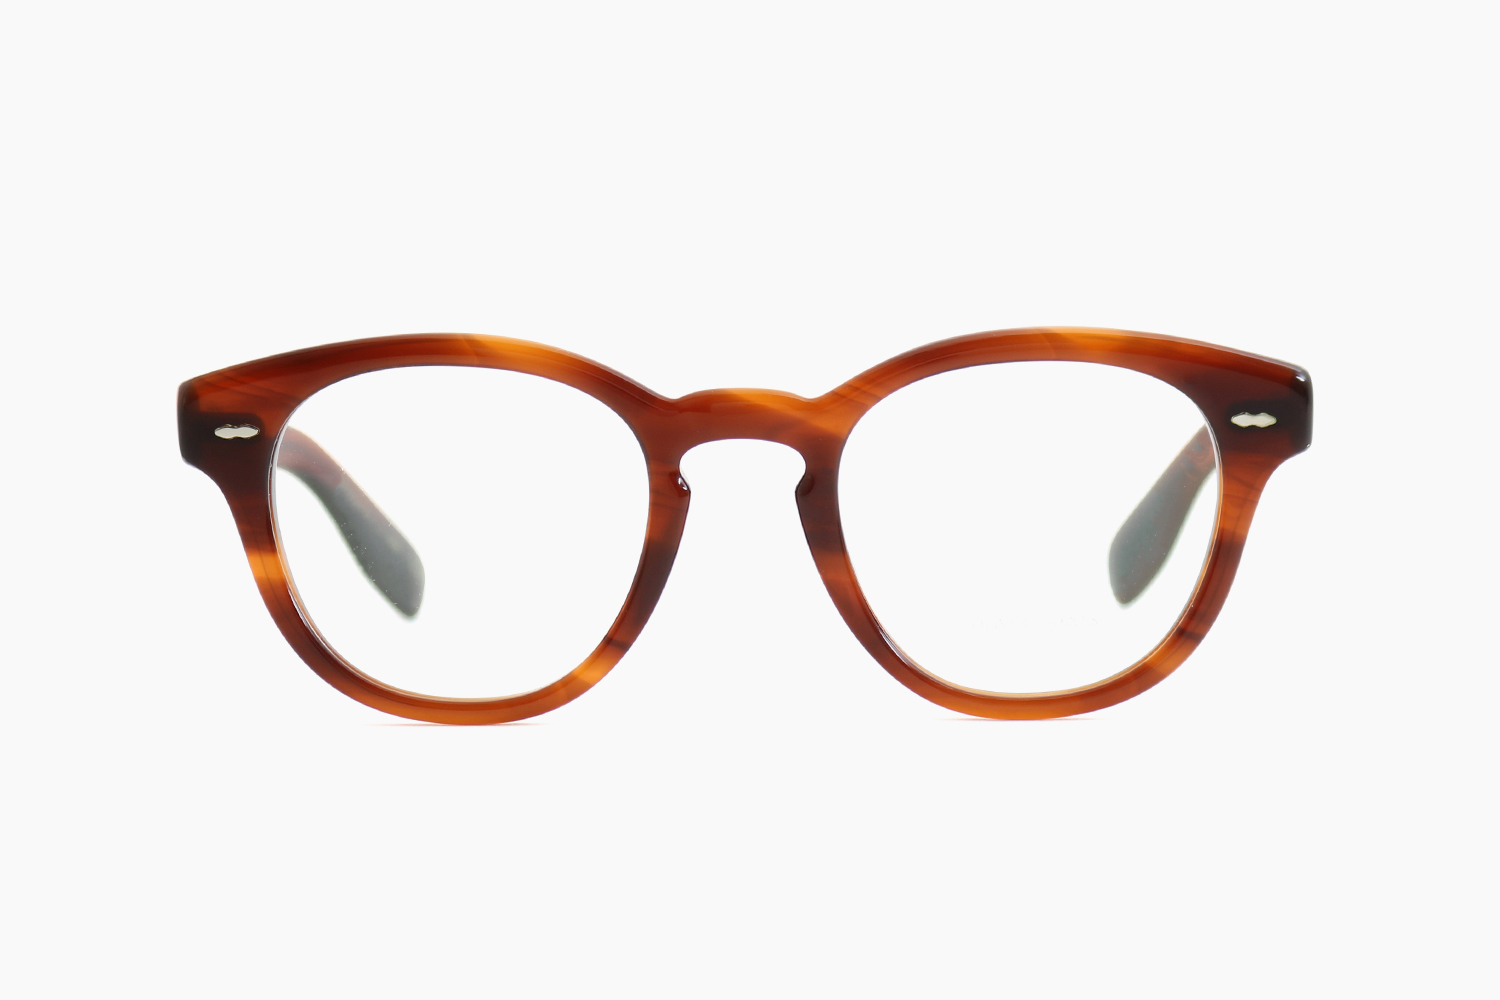 OLIVER PEOPLES｜CARY GRANT - GRANT TORTOISE（1679）｜PRODUCT ...